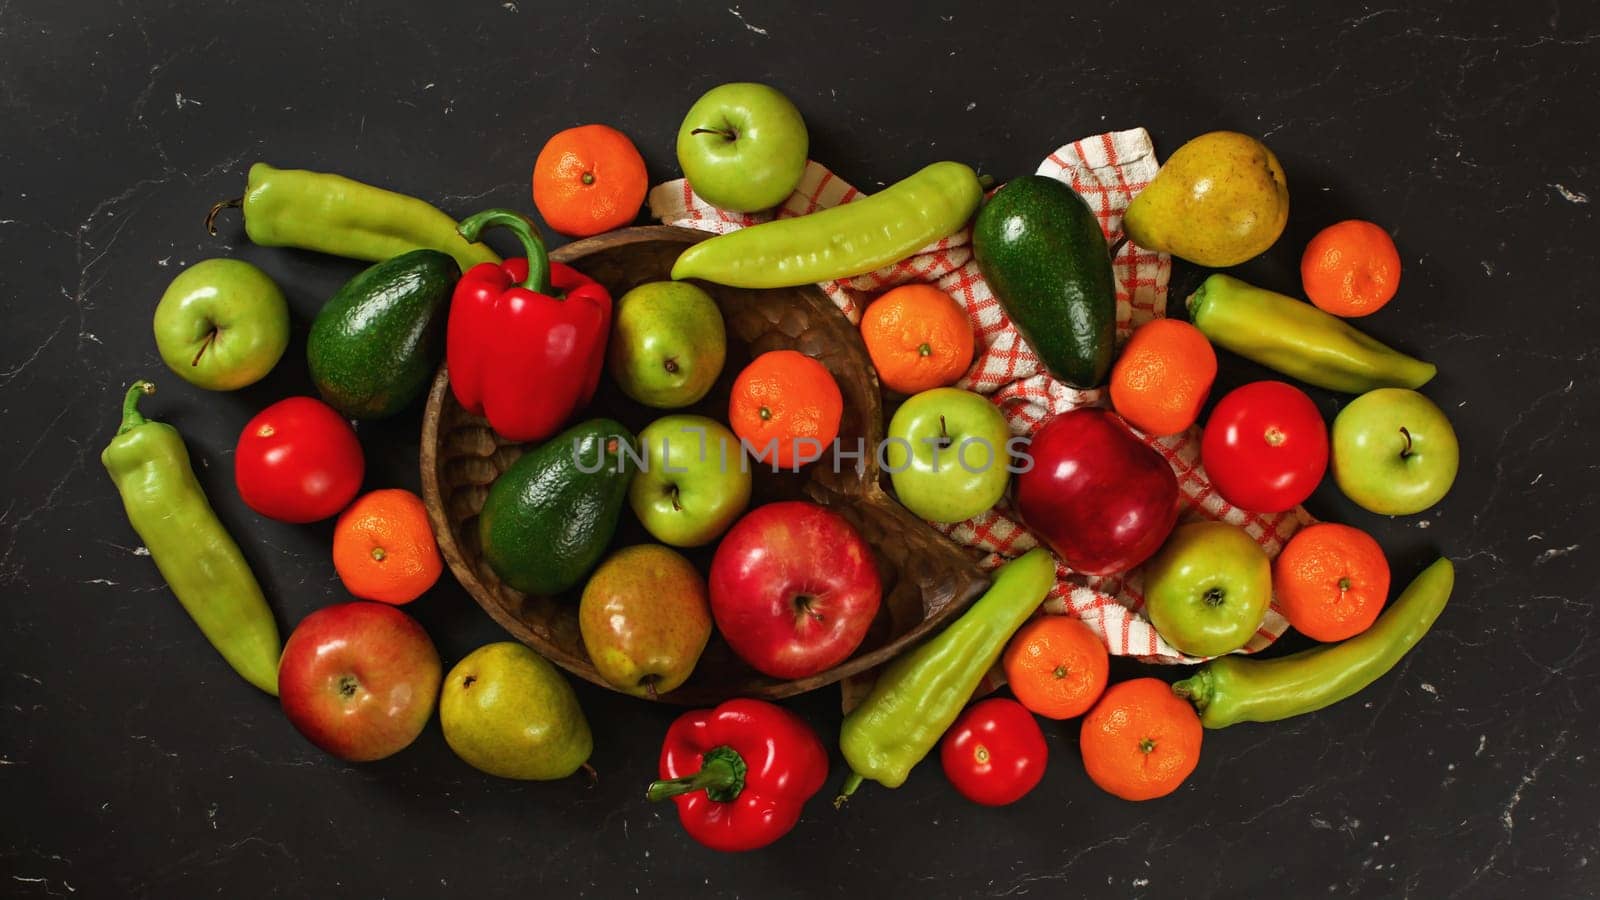 Mixed fruits and vegetables on black marble like board, healthy food concept, view from above
